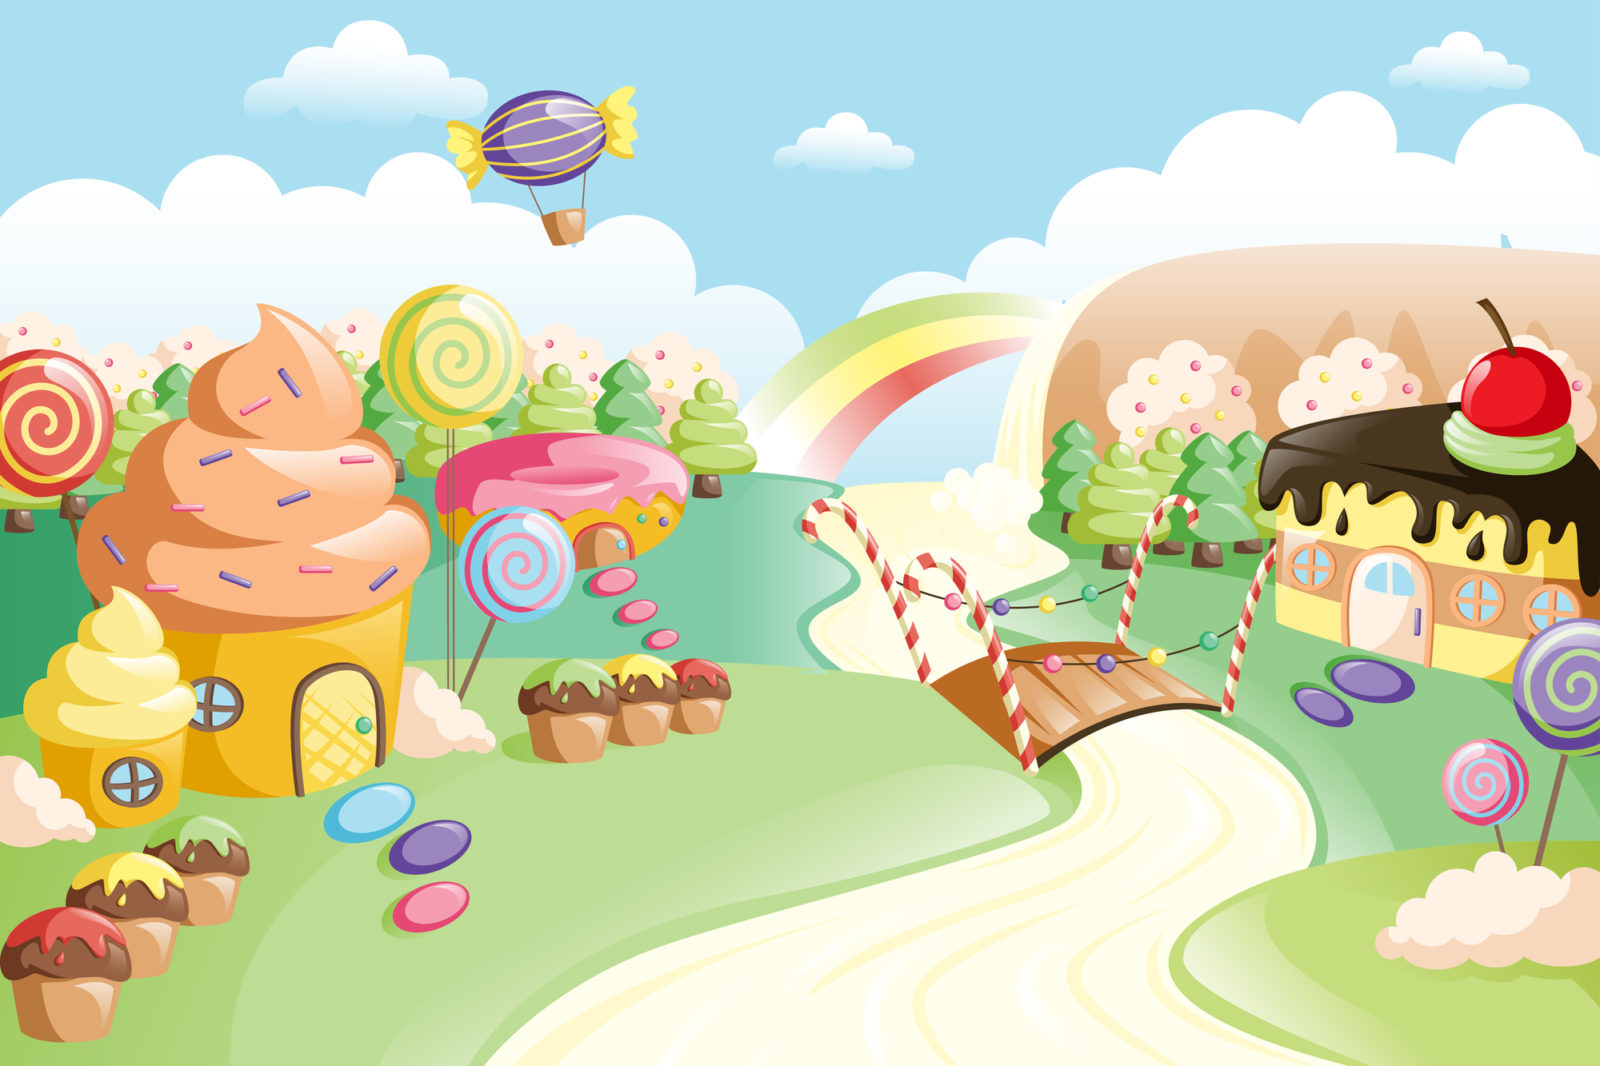 Candyland theme for events